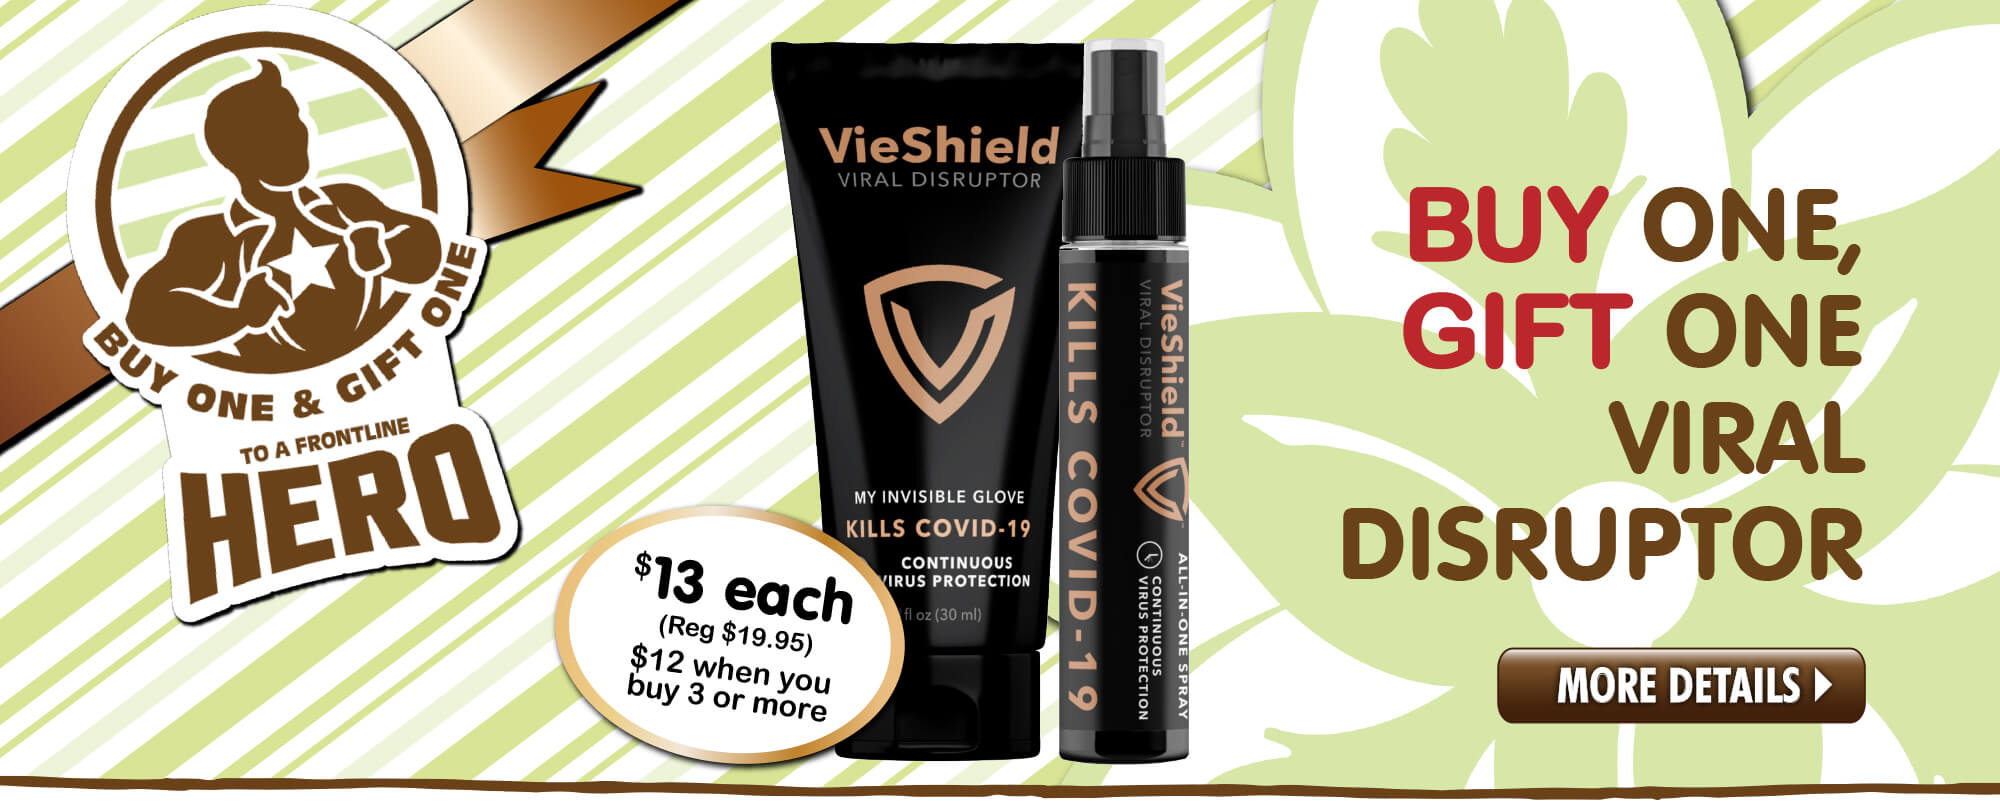 Buy One VieShield Viral Disruptor, and We'll Gift One to a Front Line Difference Maker!